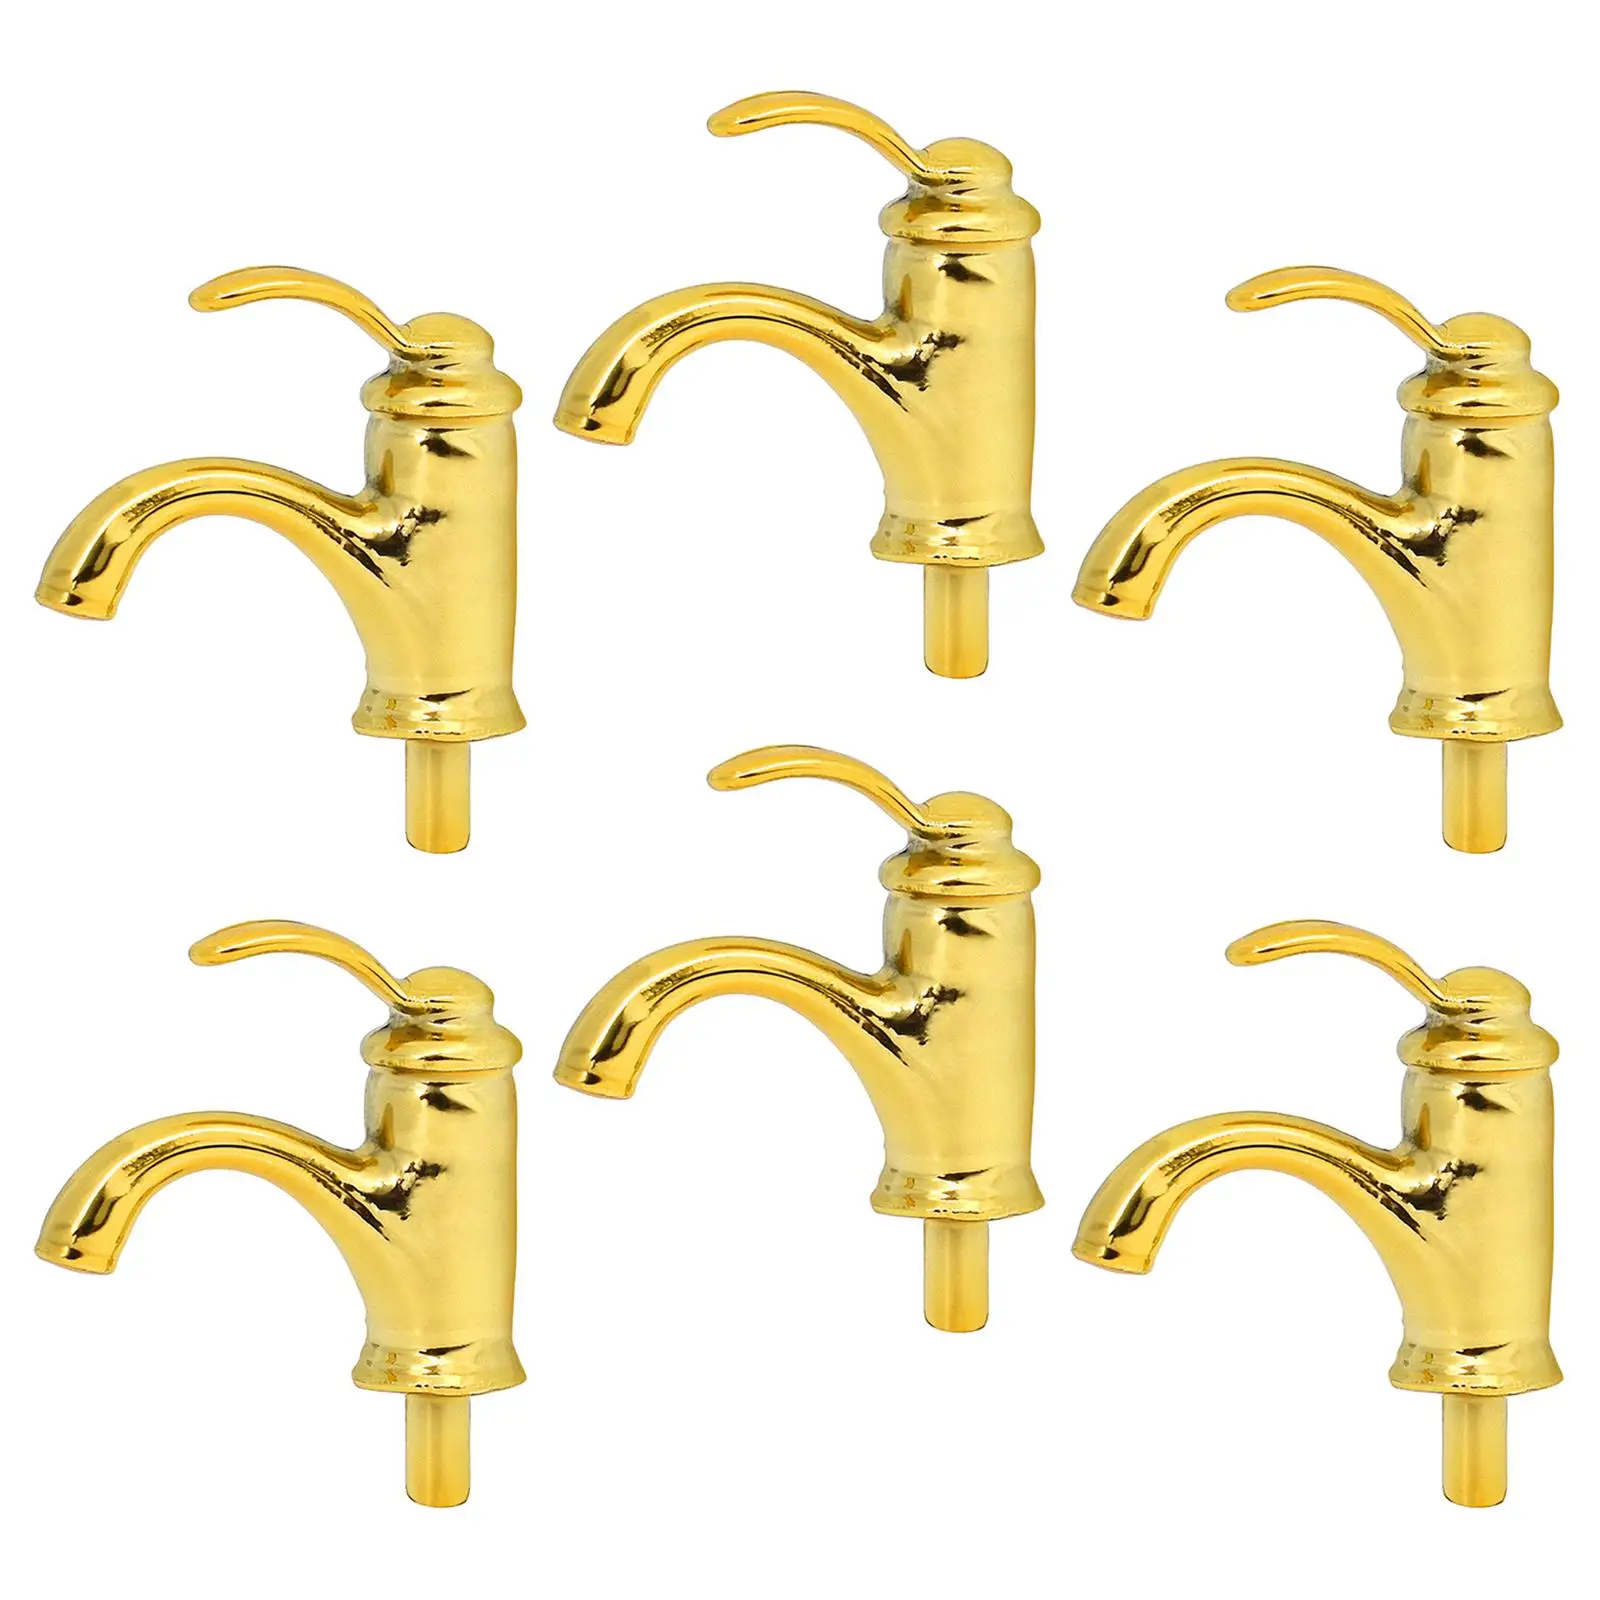 Dollhouse Single Head Faucet, 1:12 Scale Furniture Kit, for Kitchen, Bathroom, Shower